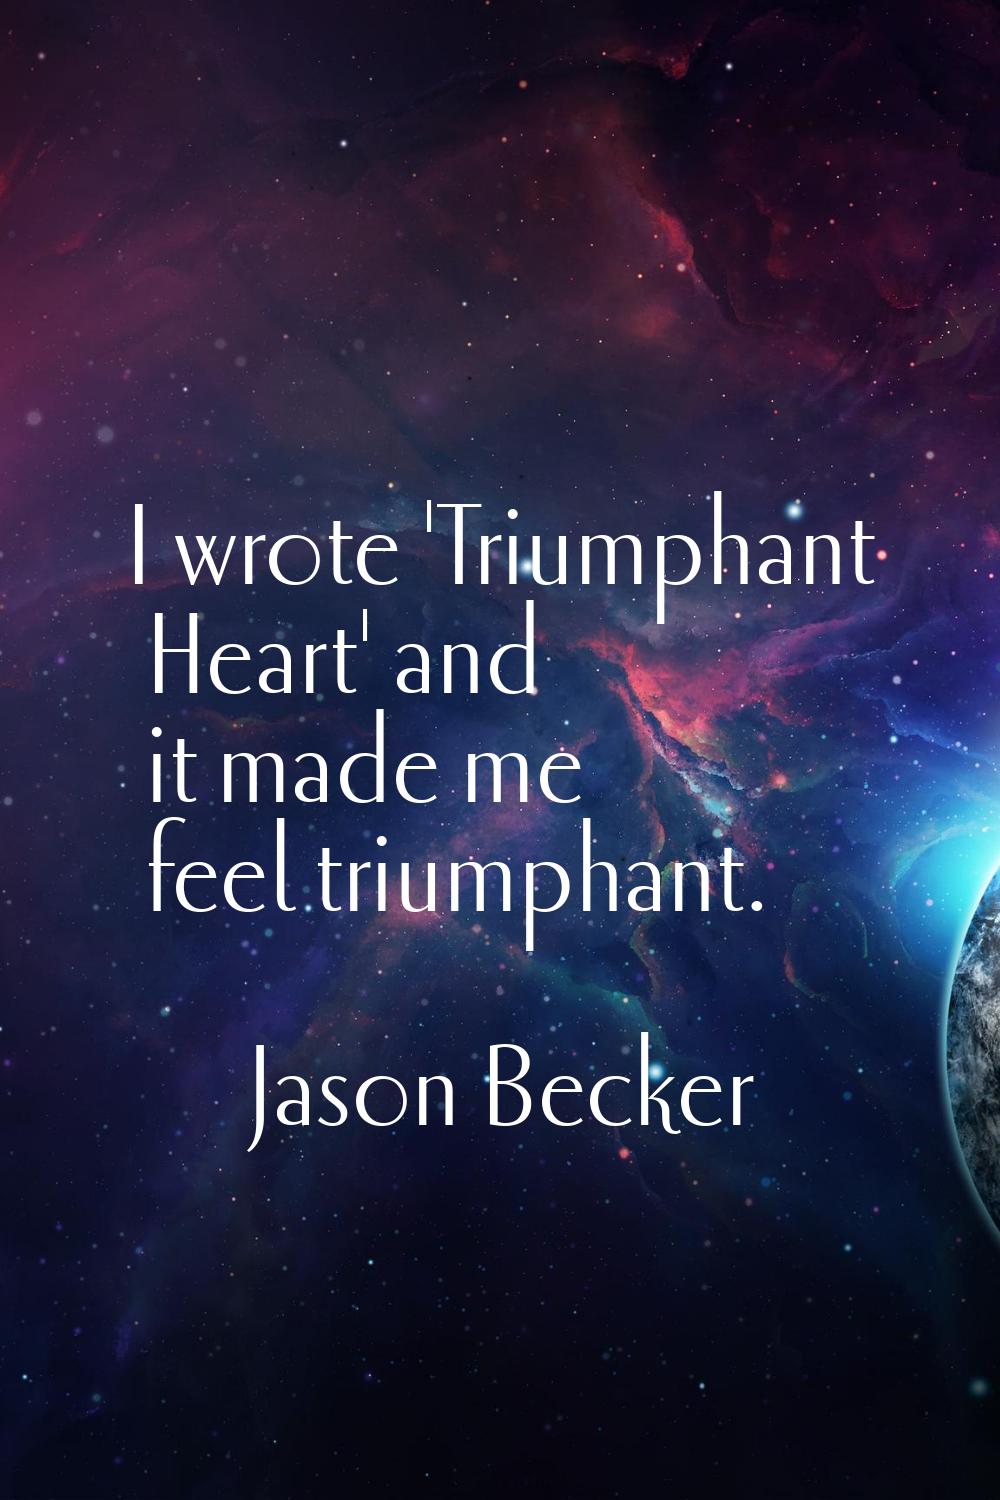 I wrote 'Triumphant Heart' and it made me feel triumphant.